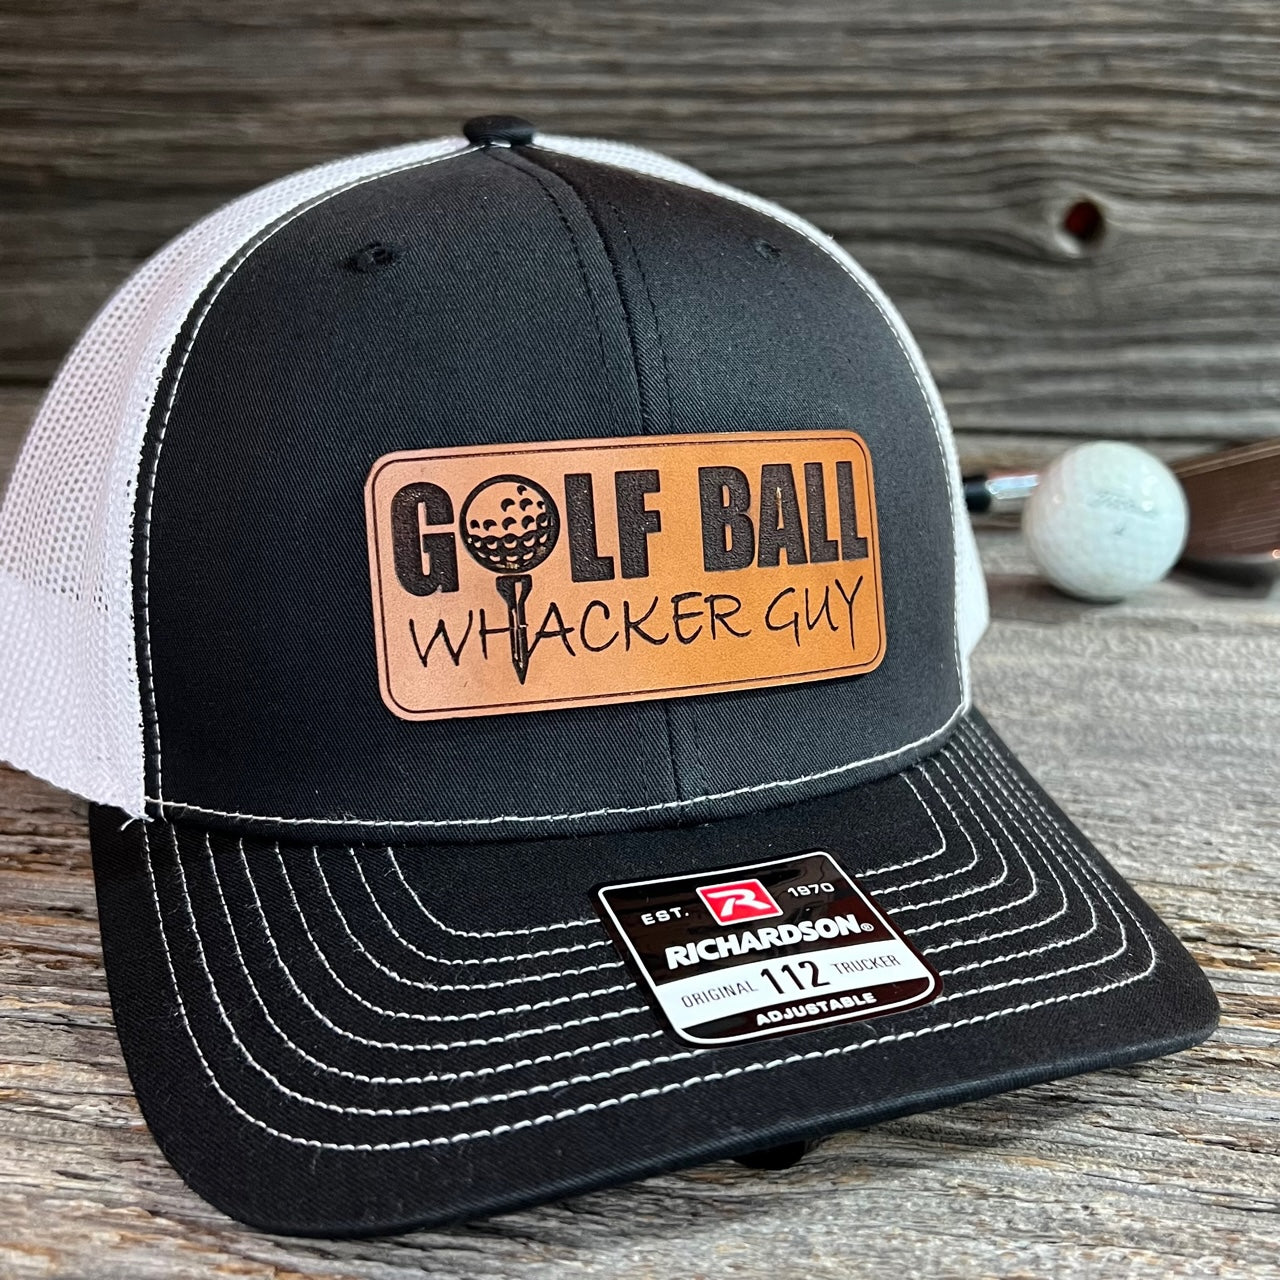 Funny Golf Hats - Click next pic for patches